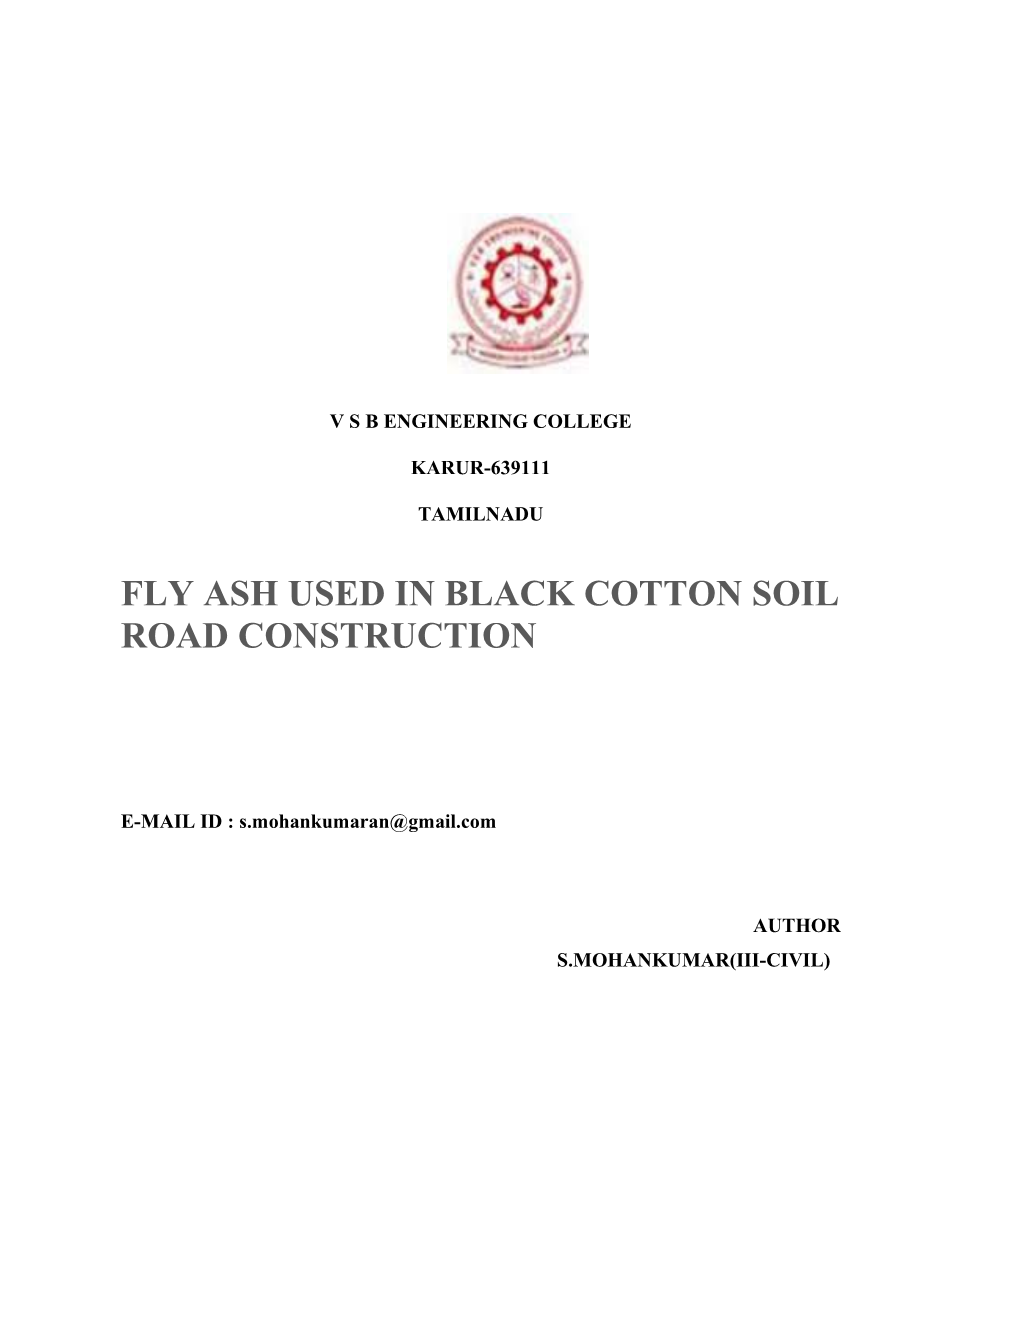 Construction of a Road in the Black Cotton Soil by Using Fly Ash